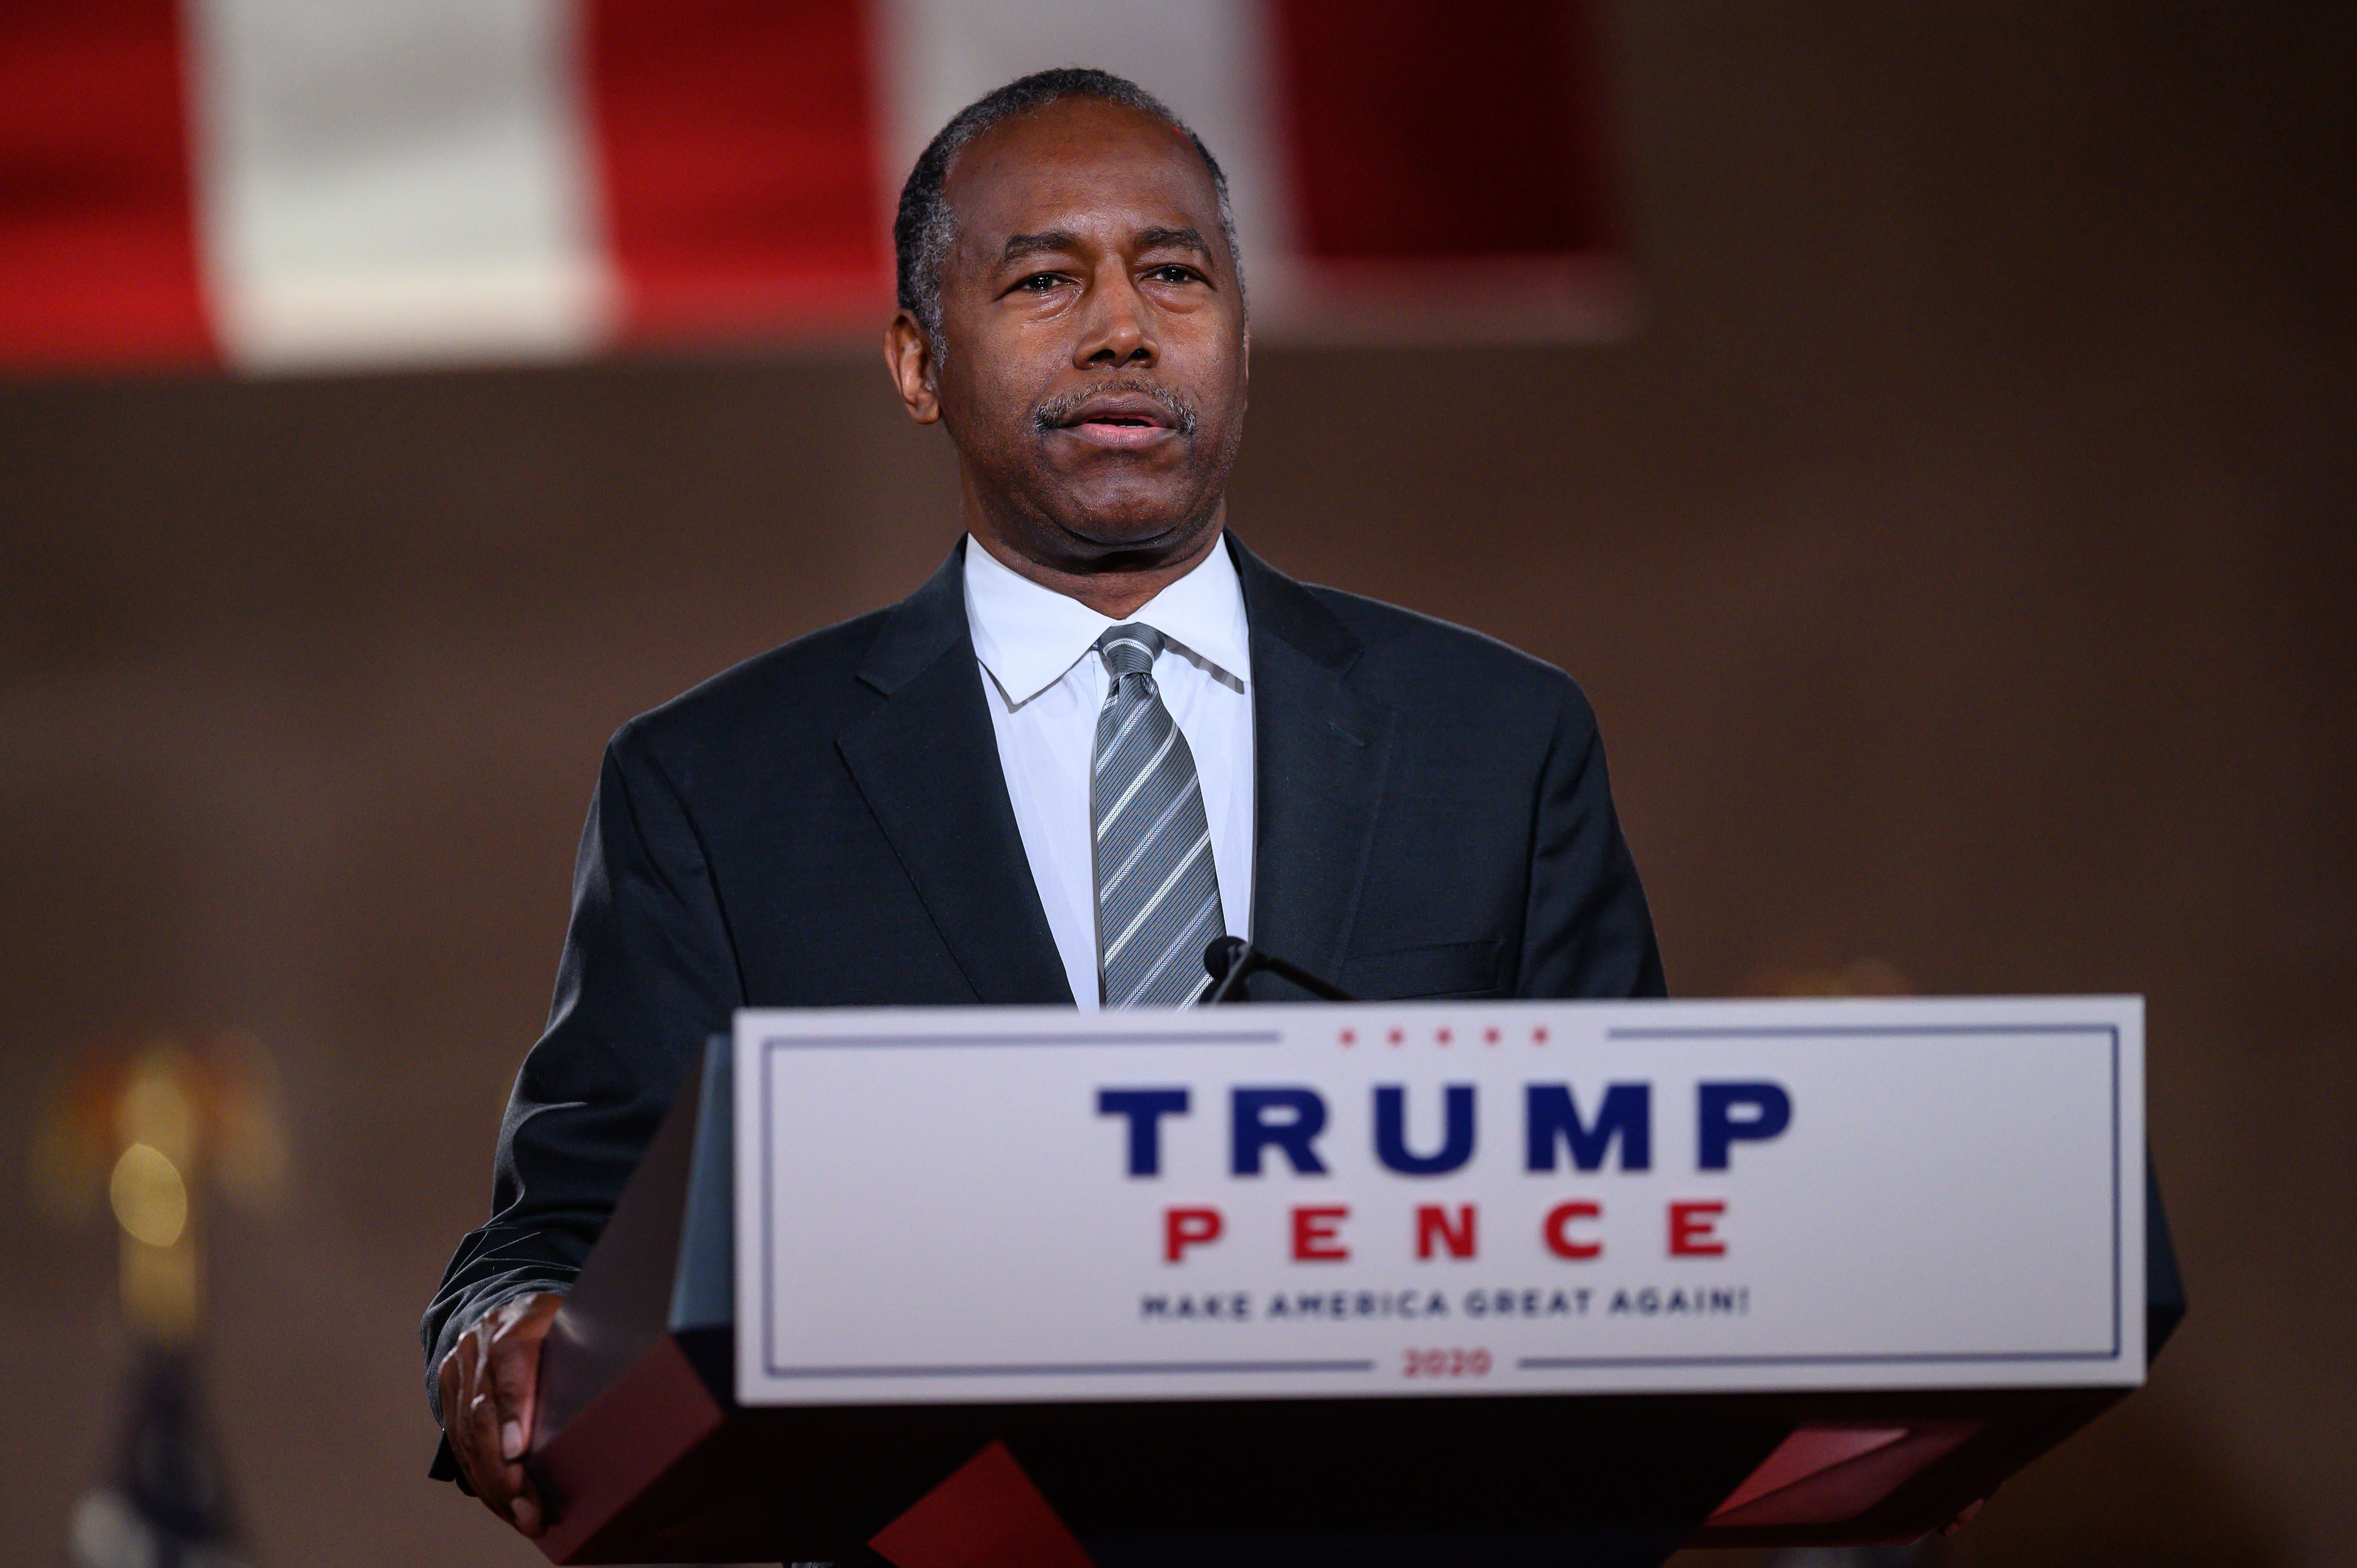 HUD Secretary Ben Carson speaks during the Republican National Convention in Washington, DC, on August 27.